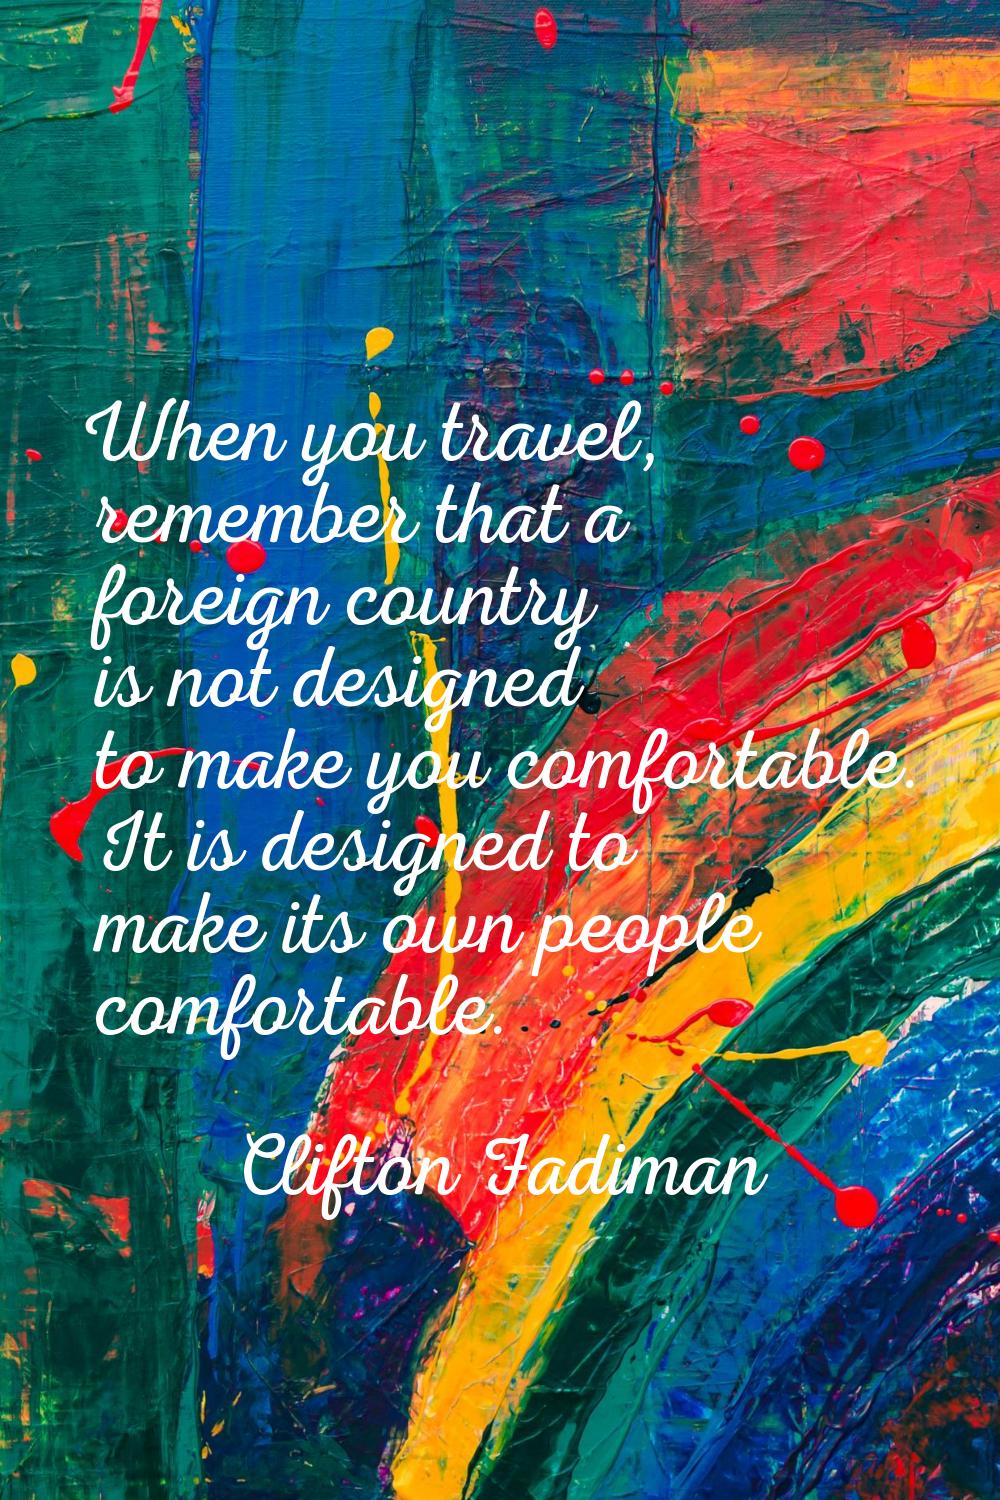 When you travel, remember that a foreign country is not designed to make you comfortable. It is des